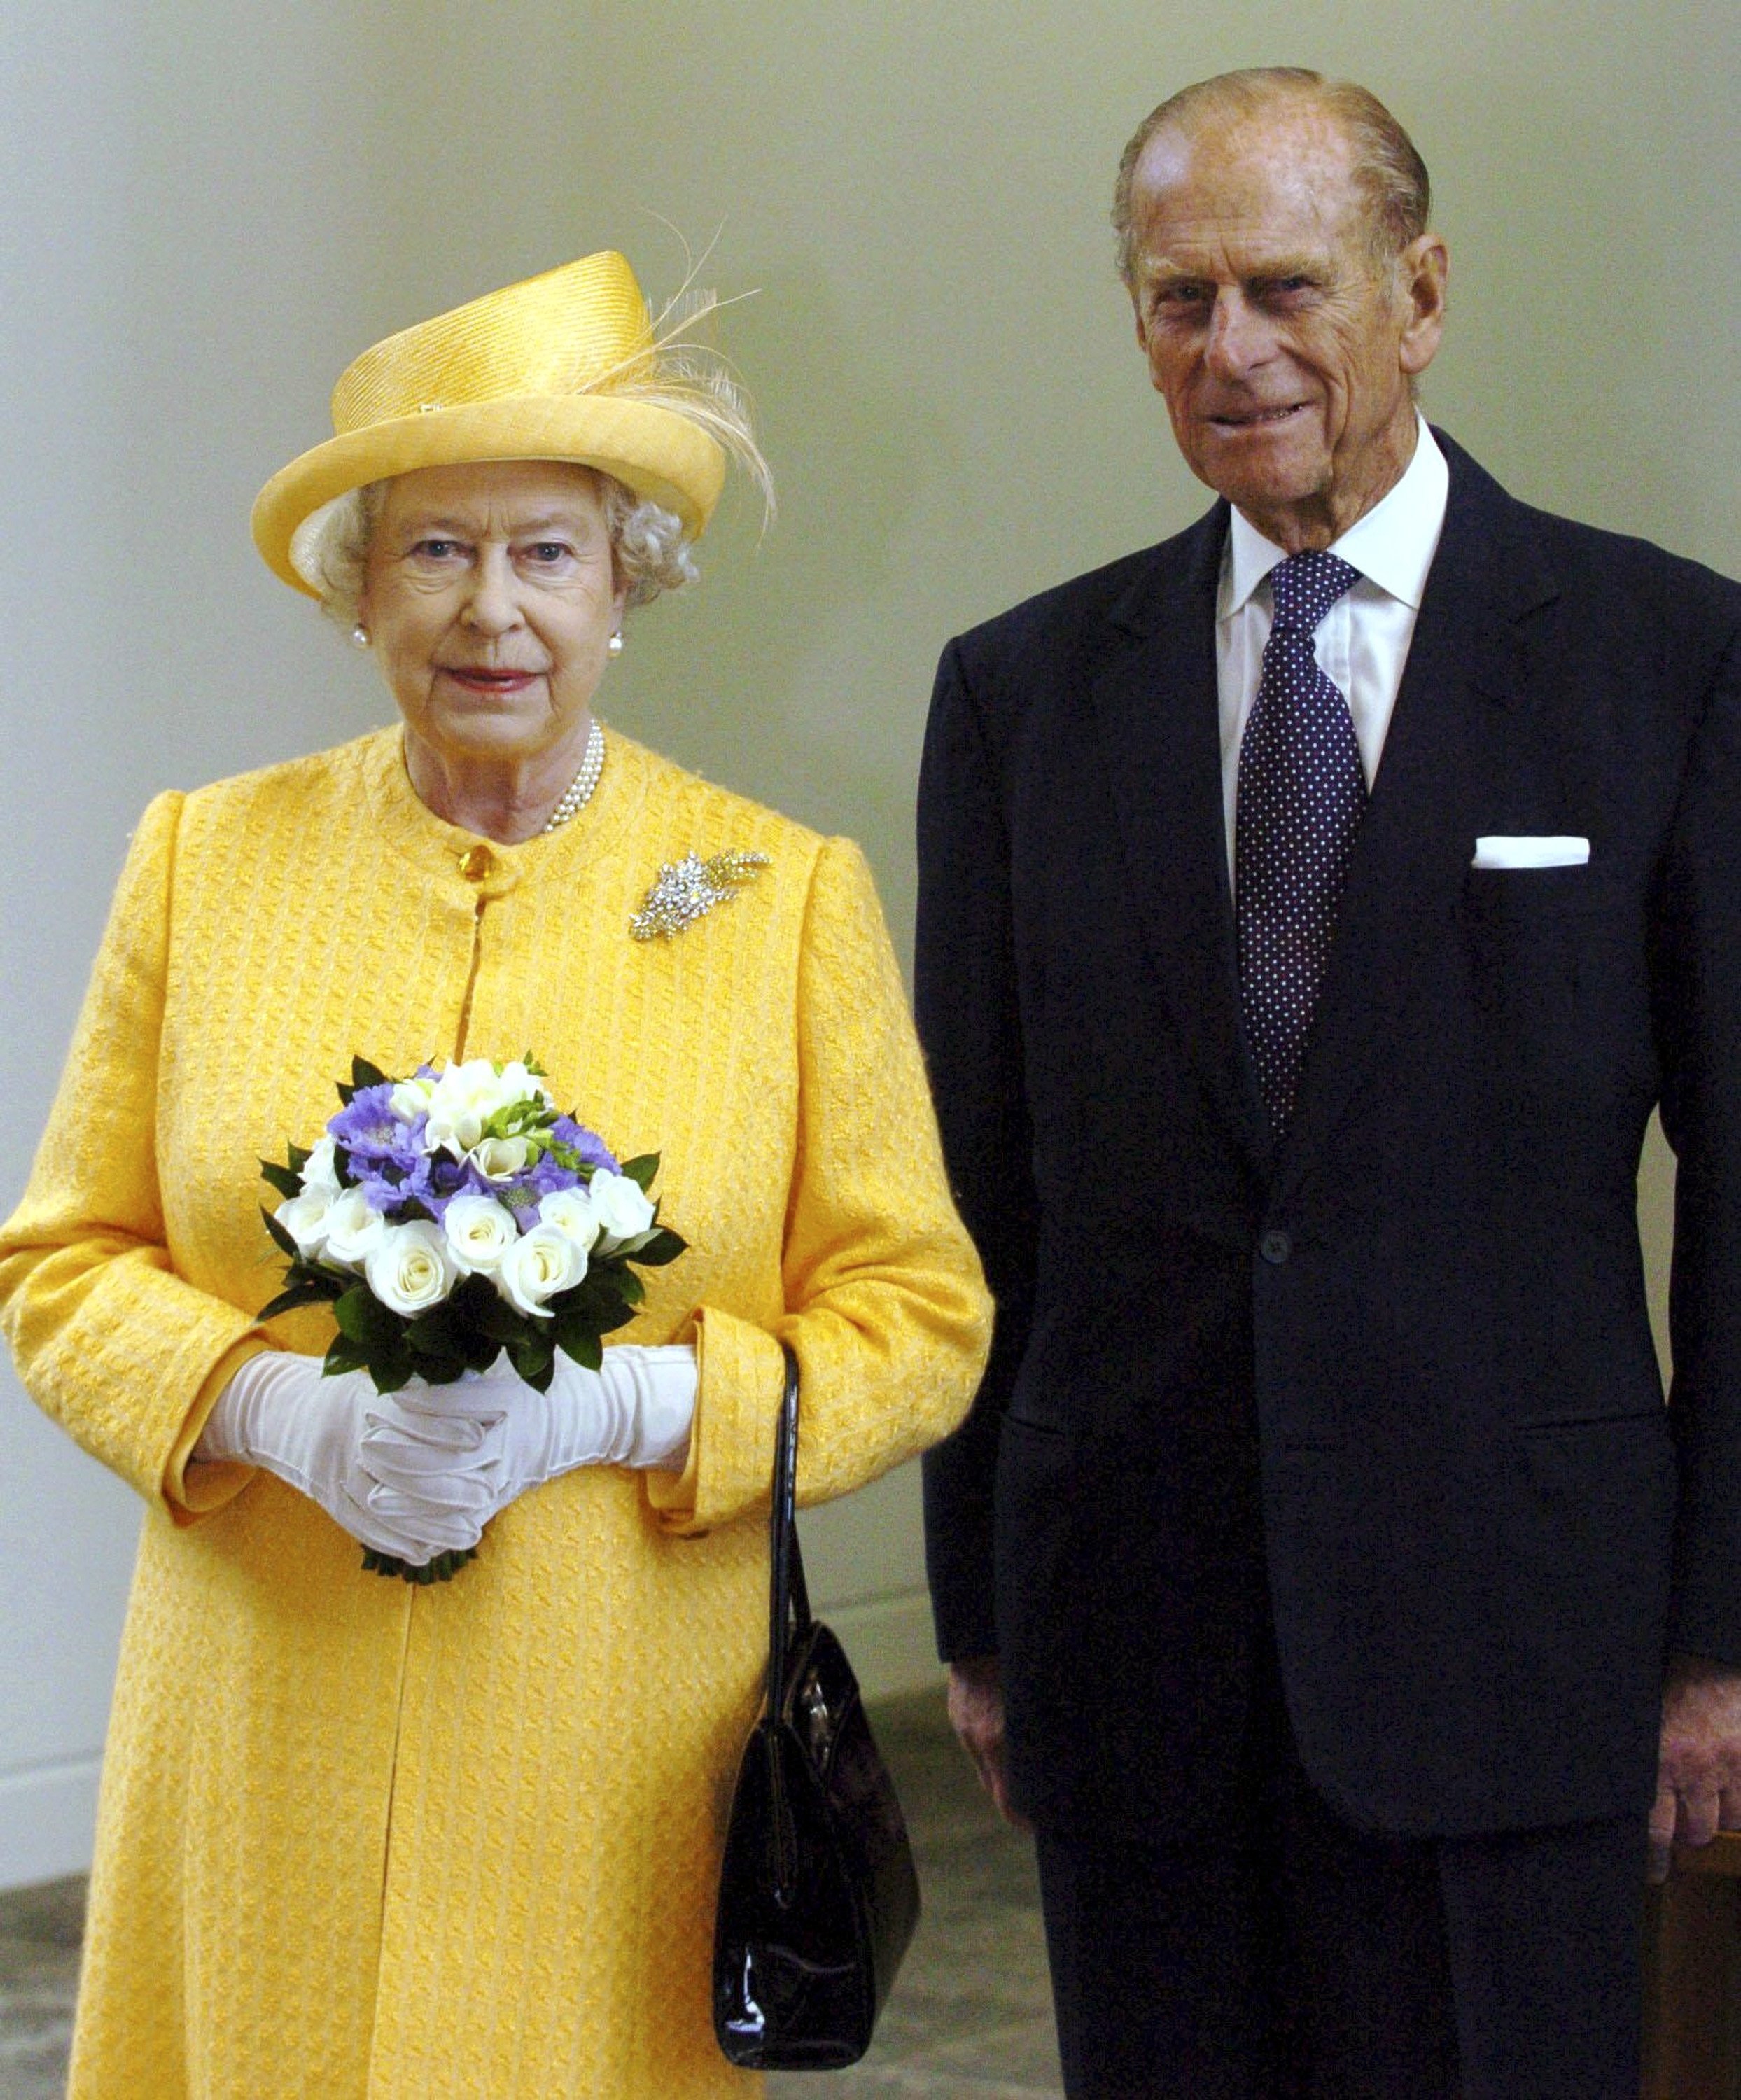 Queen Elizabeth II and Prince Philip at the opening of the Royal Bank of Scotland in Edinburgh on September 14, 2005 | Source: Getty Images